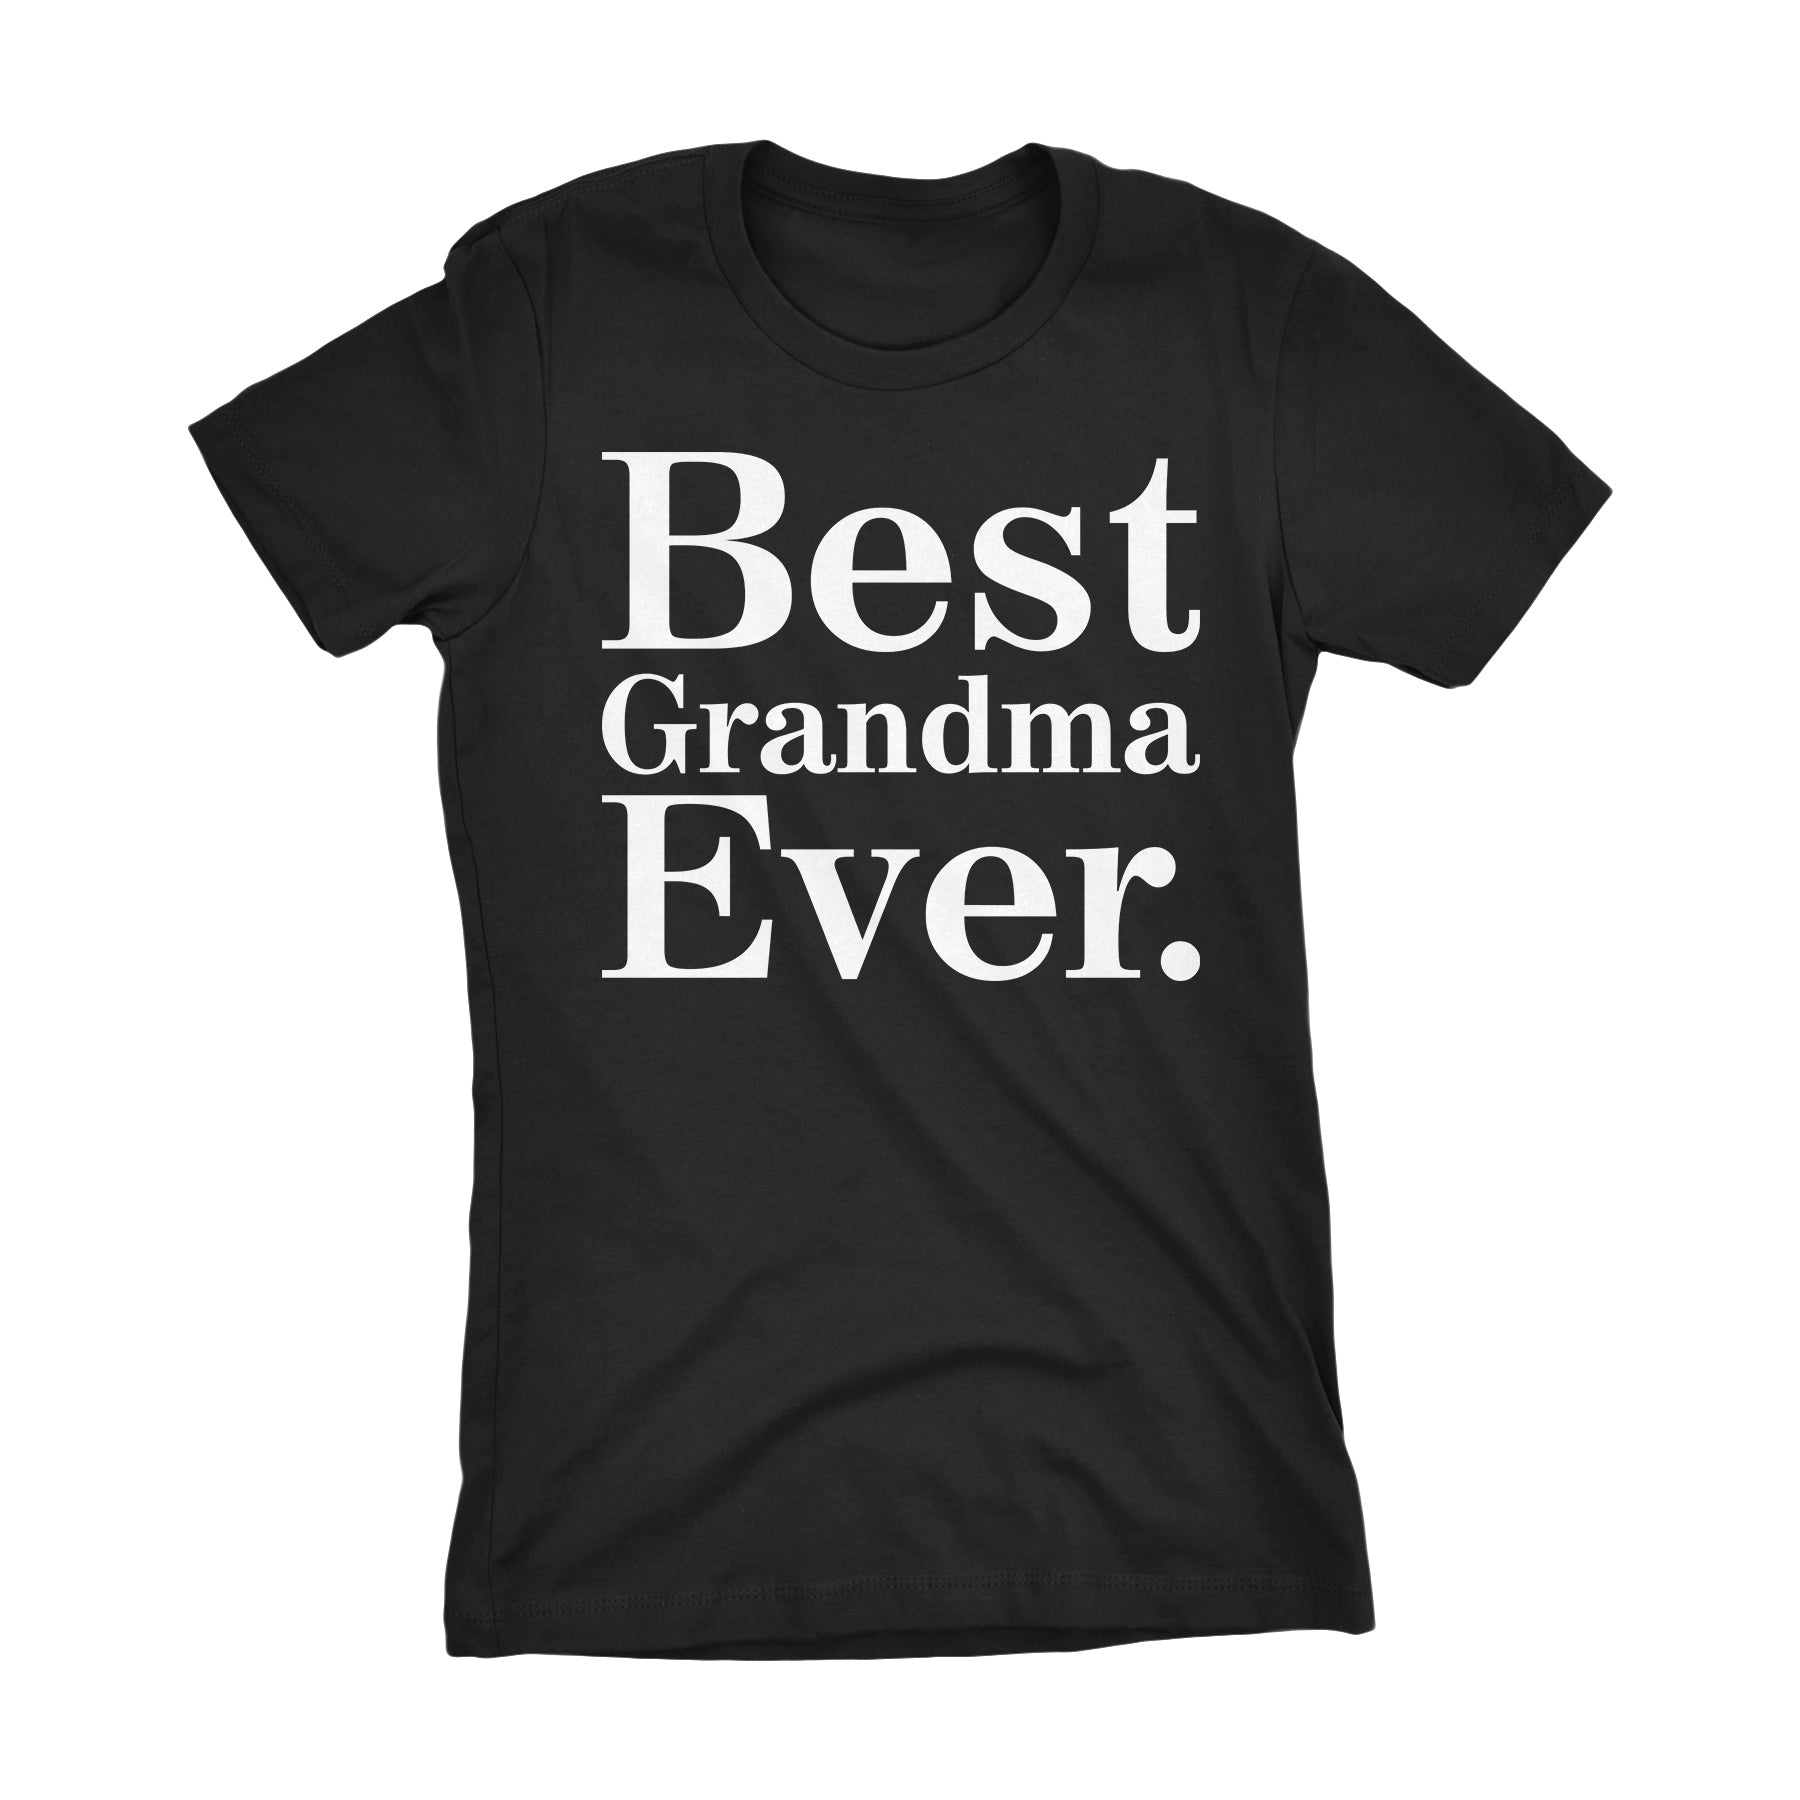 Best GRANDMA Ever - 001 Mother's Day Gift Grandmother Ladies Fit T-shirt